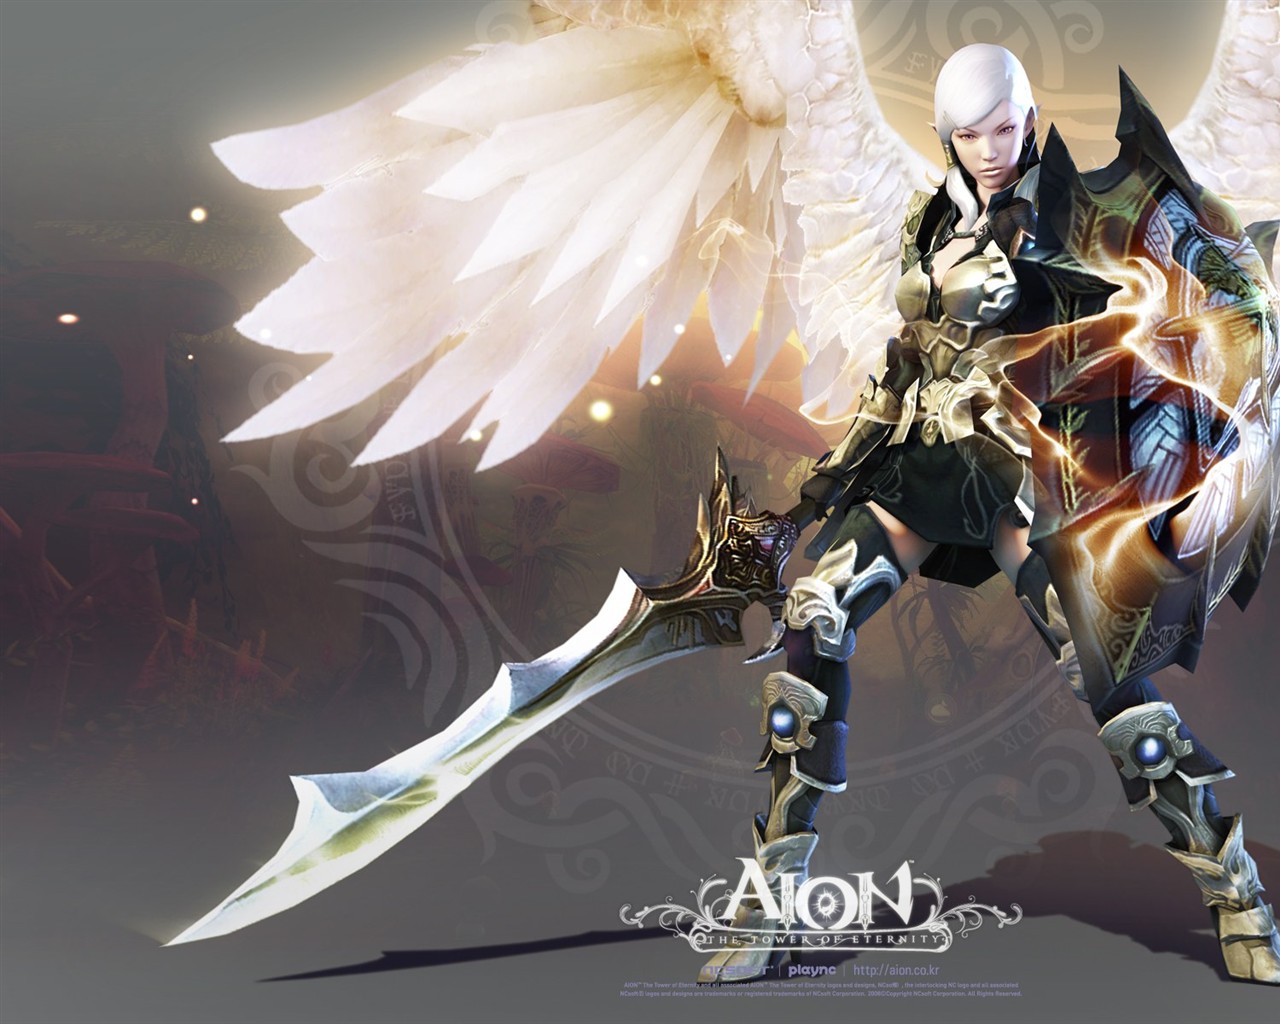 Aion modeling HD gaming wallpapers #1 - 1280x1024